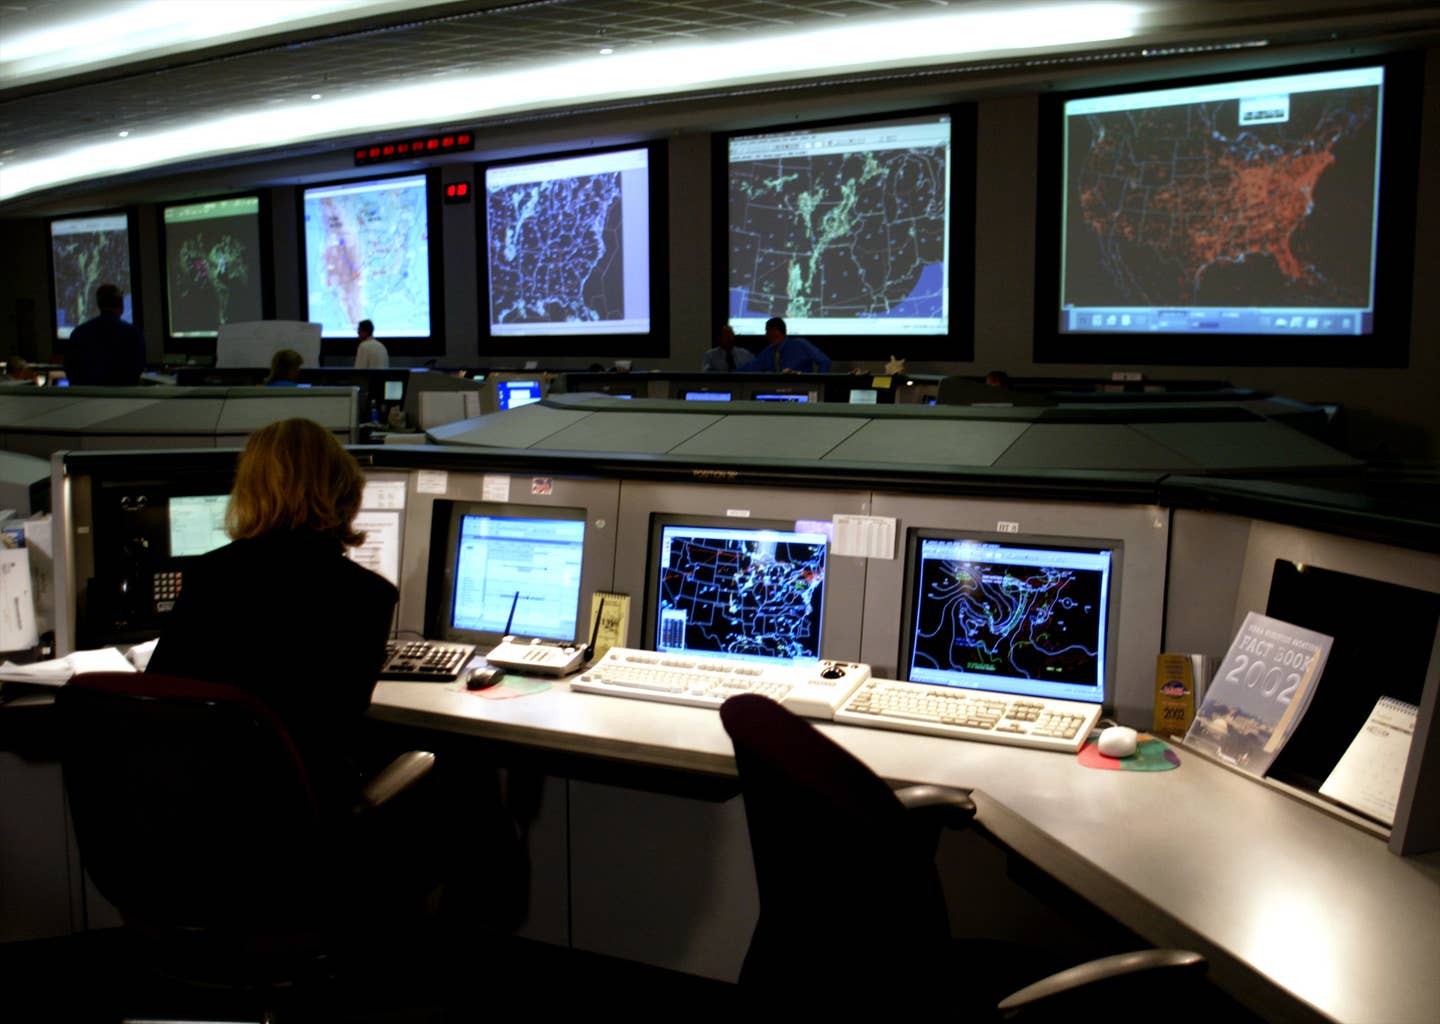 Federal Aviation Administration employee keeps track of 5000 aircraft in the air over the United States at the System Command Center 12 August 2002 in Herndon, Virginia. The command center was central in the September 11th terrorist incident and was responsible for grounding all planes after the attack became known. <em>Credit: Photo credit should read STEPHEN JAFFE/AFP via Getty Images</em>